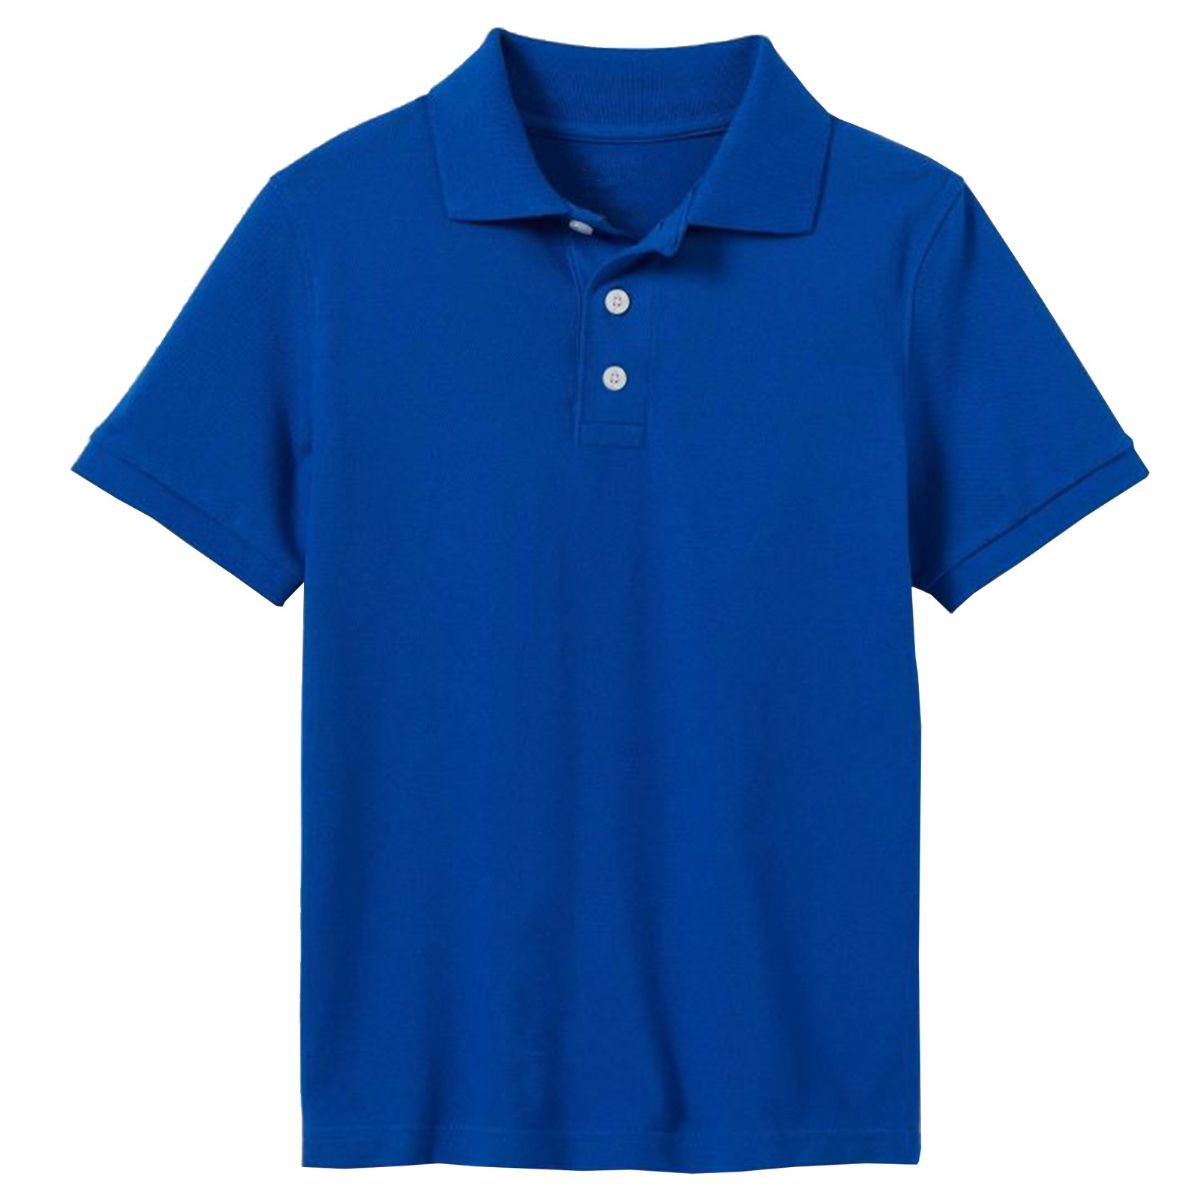 24 Pieces of Youth Polo Shirt Royal Blue In Size S